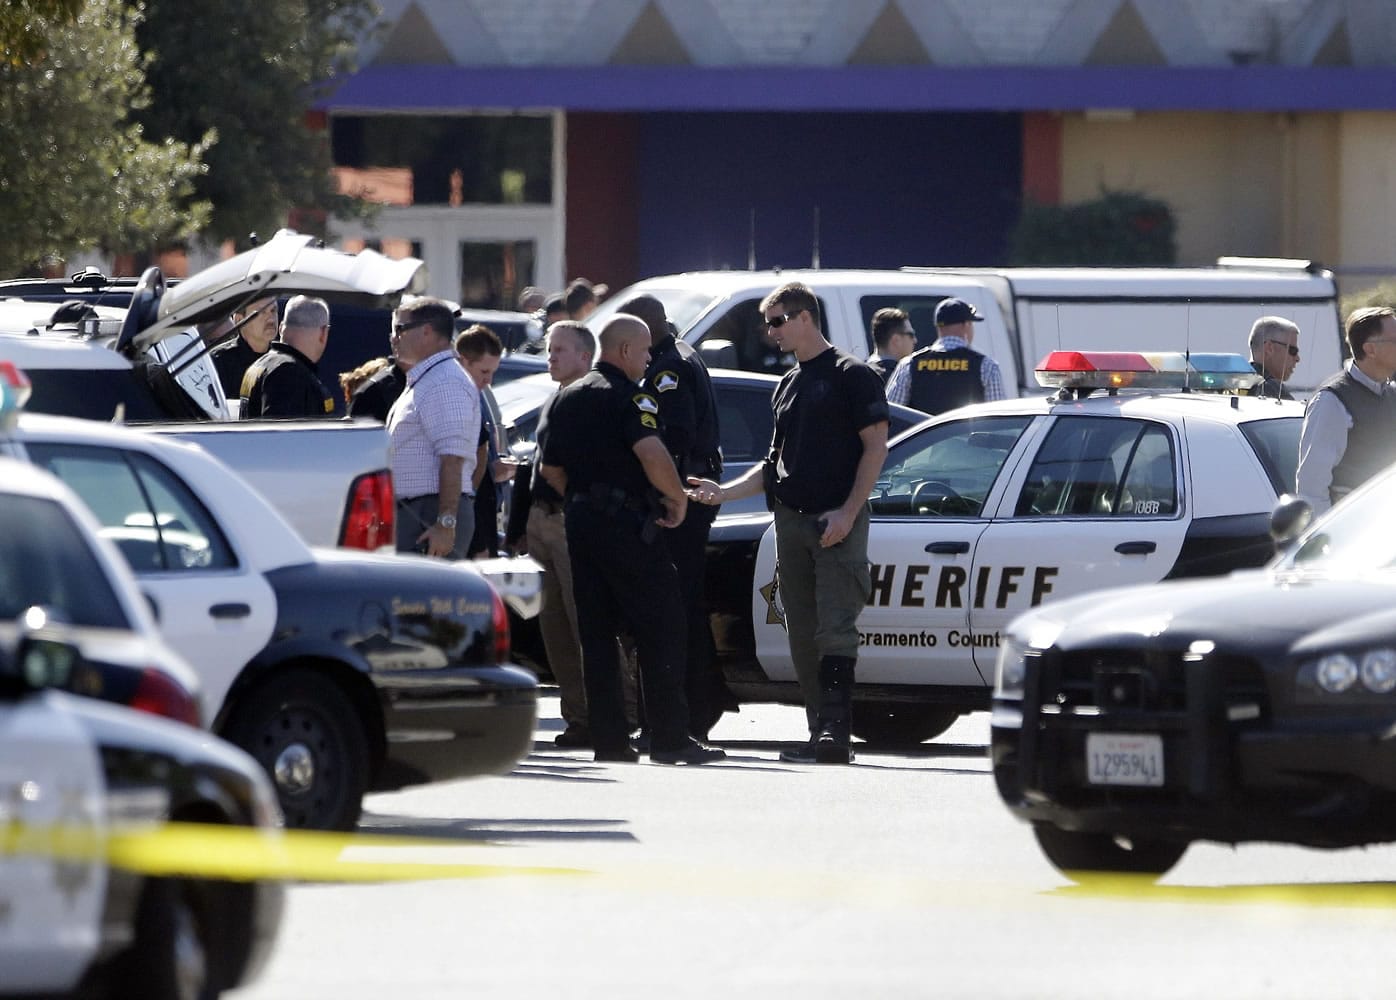 Law enforcement officers gather Friday at the site where a Sacramento County Sheriff's deputy was shot by an assailant who then carjacked two vehicles prompting a manhunt in Sacramento, Calif.